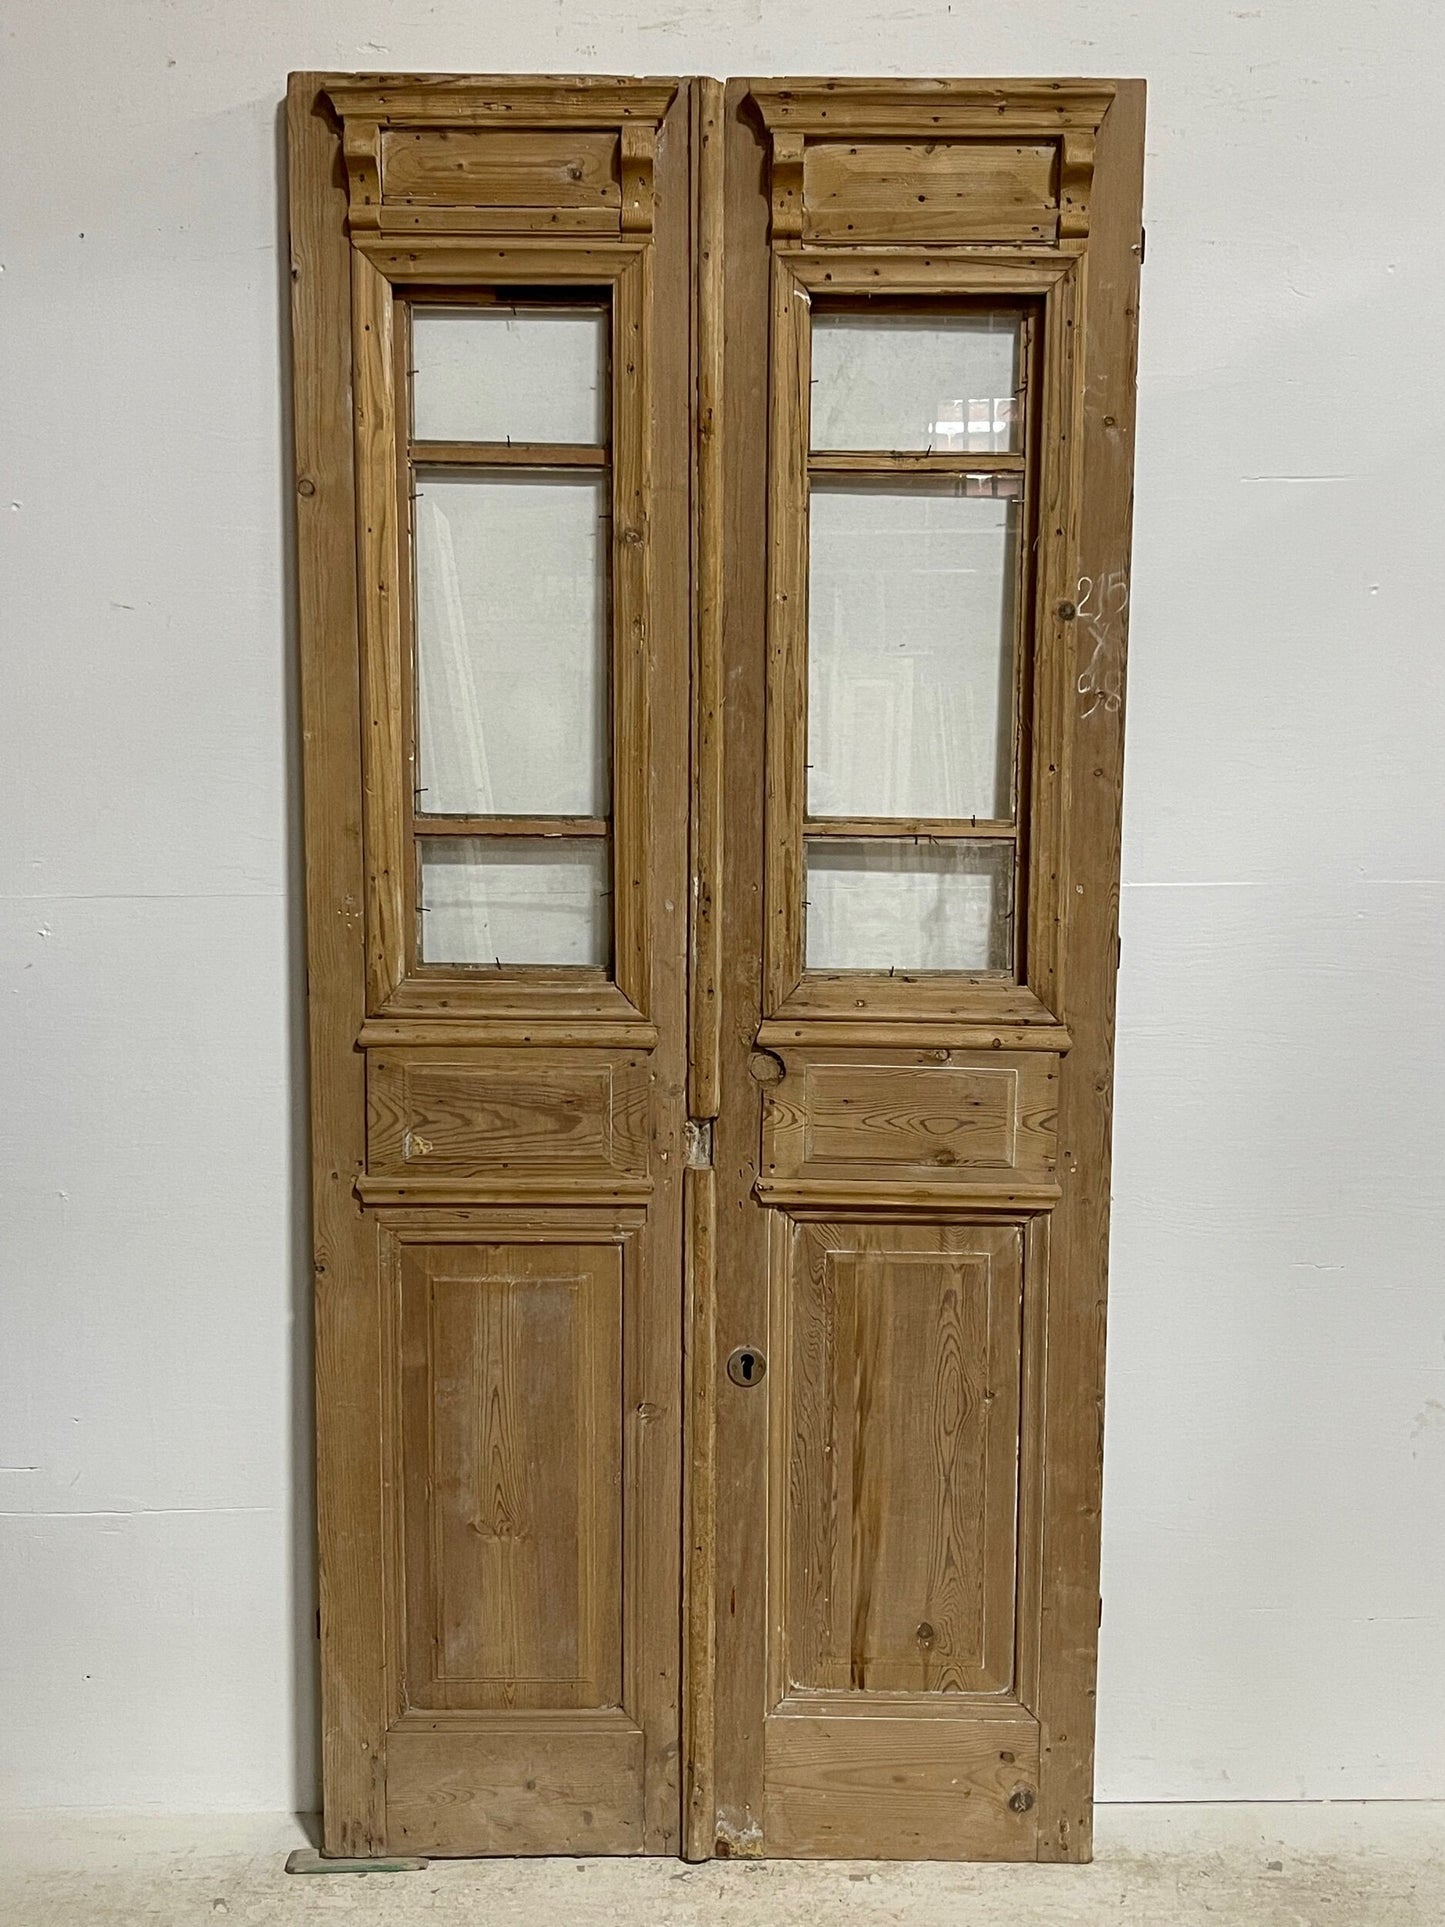 Antique French doors with glass (84.5x38.5) H0110s